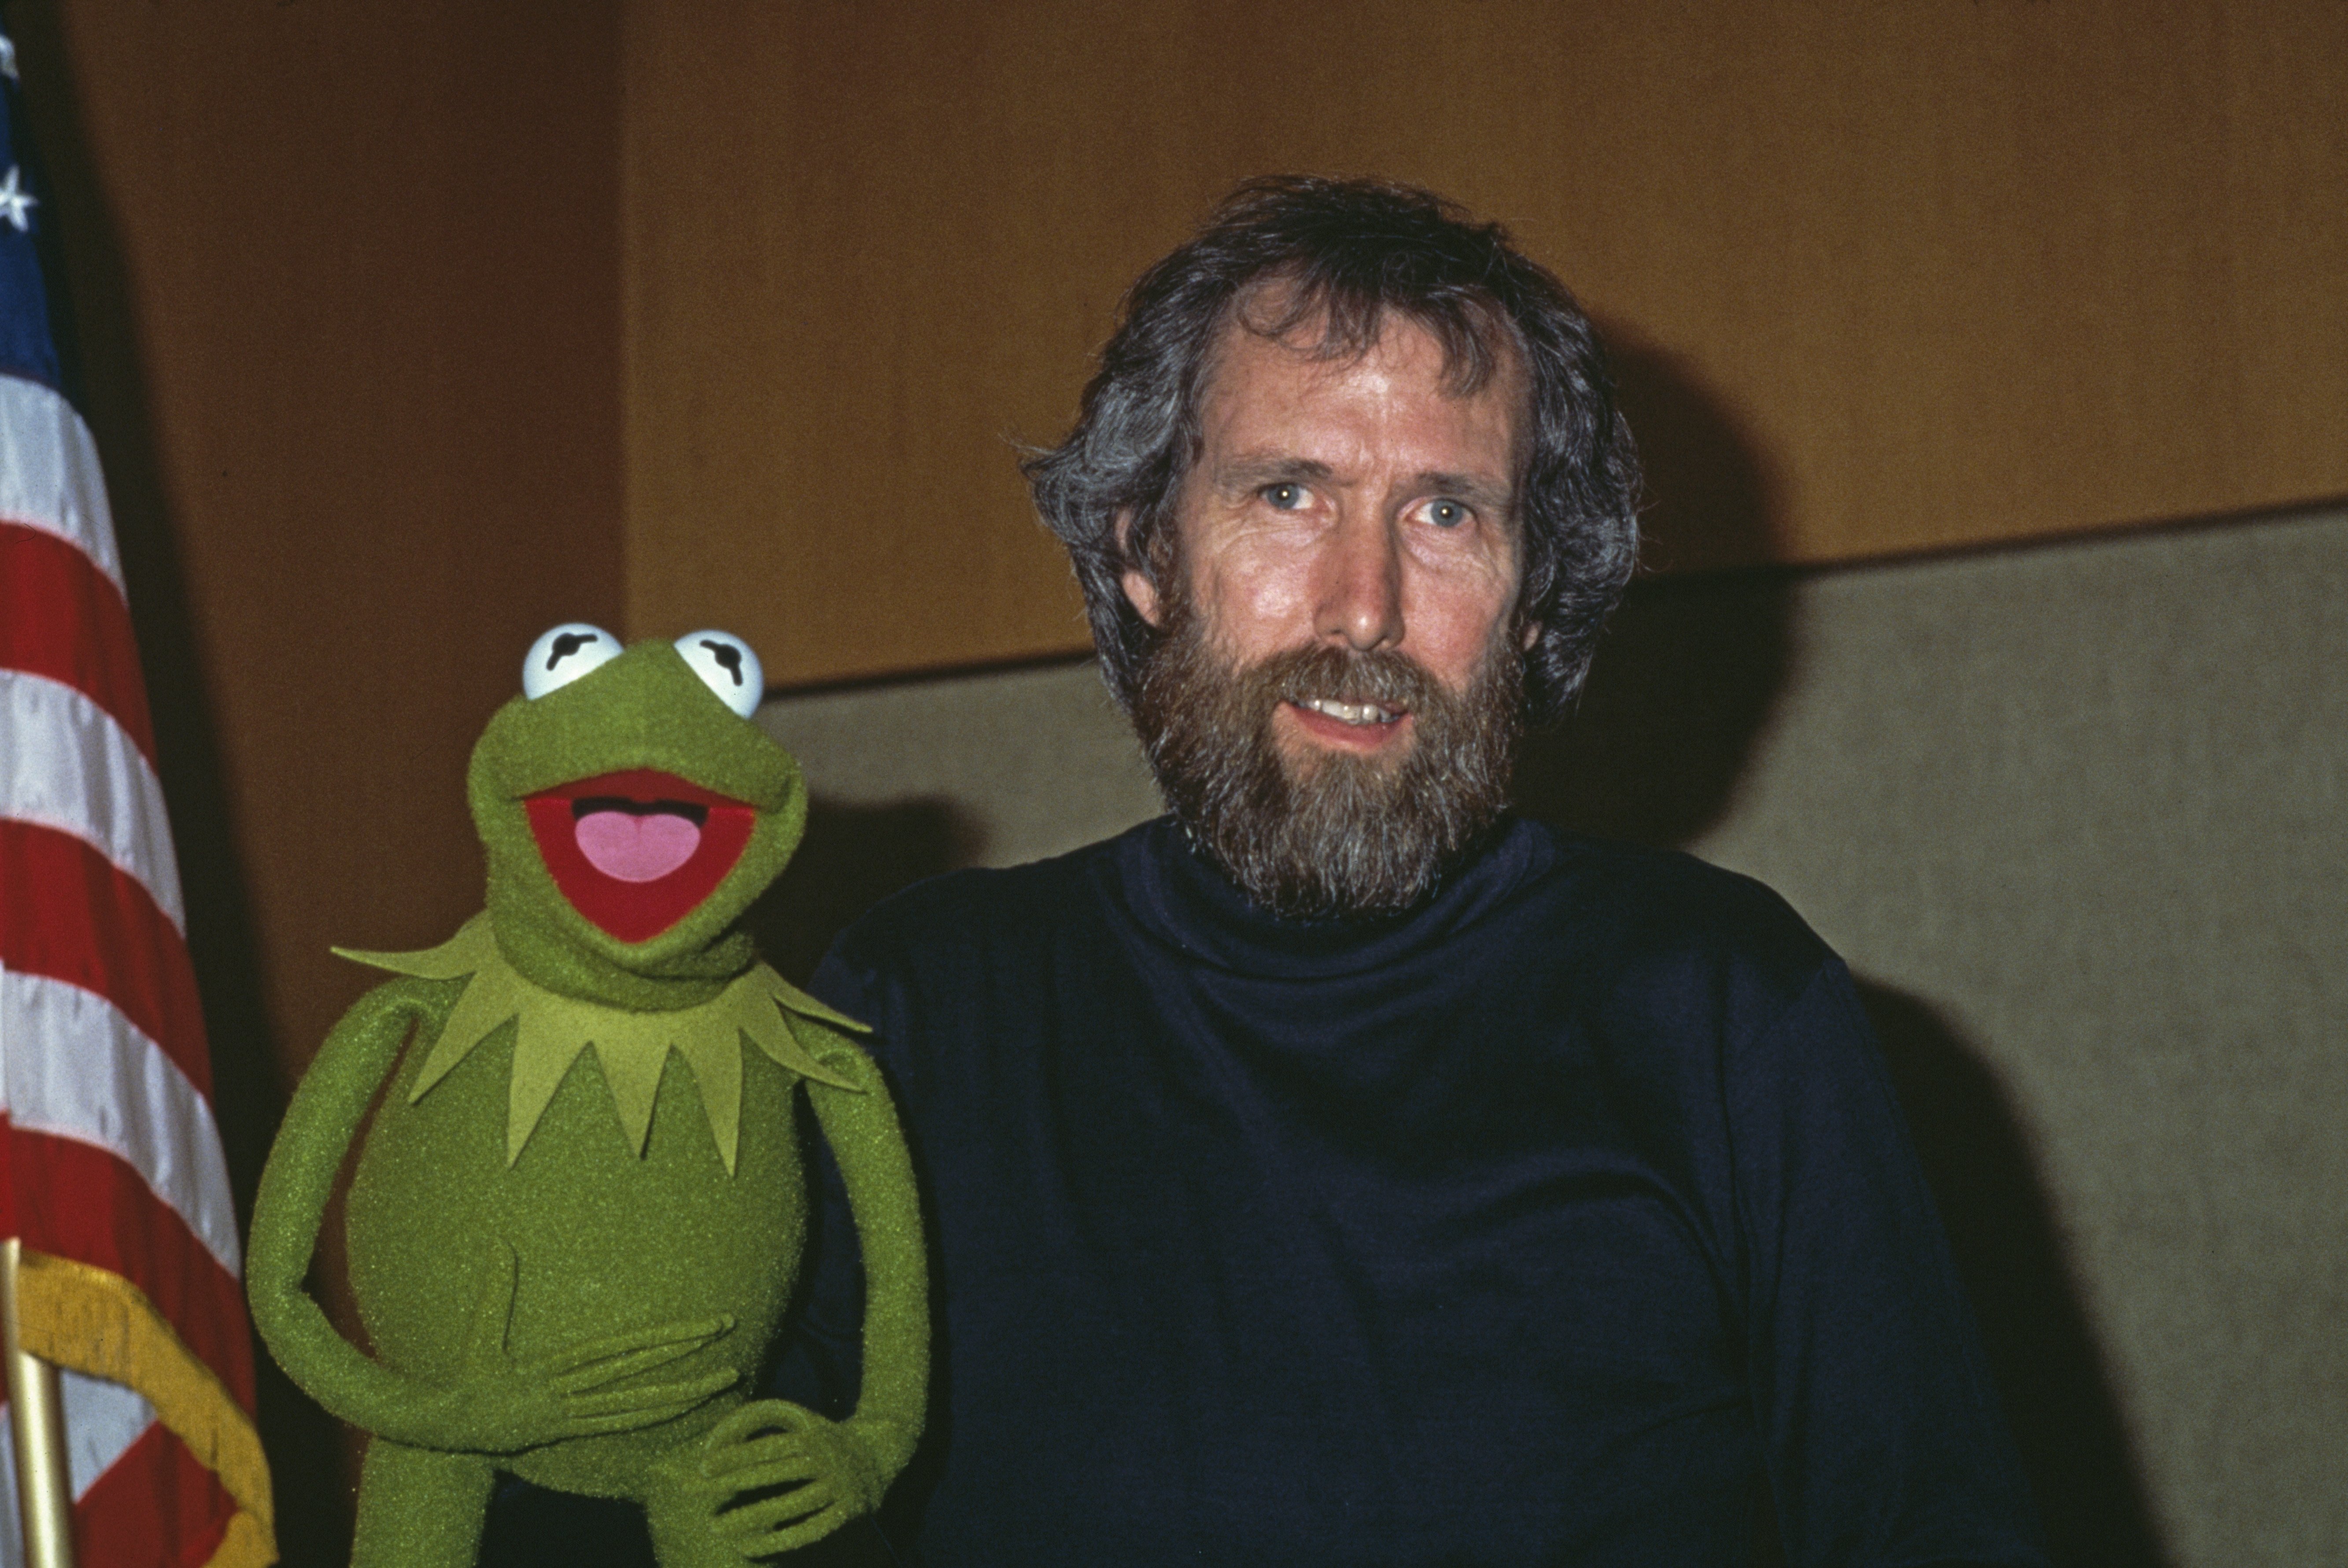 American puppeteer and filmmaker Jim Henson (1936 - 1990) with his best-known Muppet character, Kermit the Frog, January 1984. | Source: Getty Images